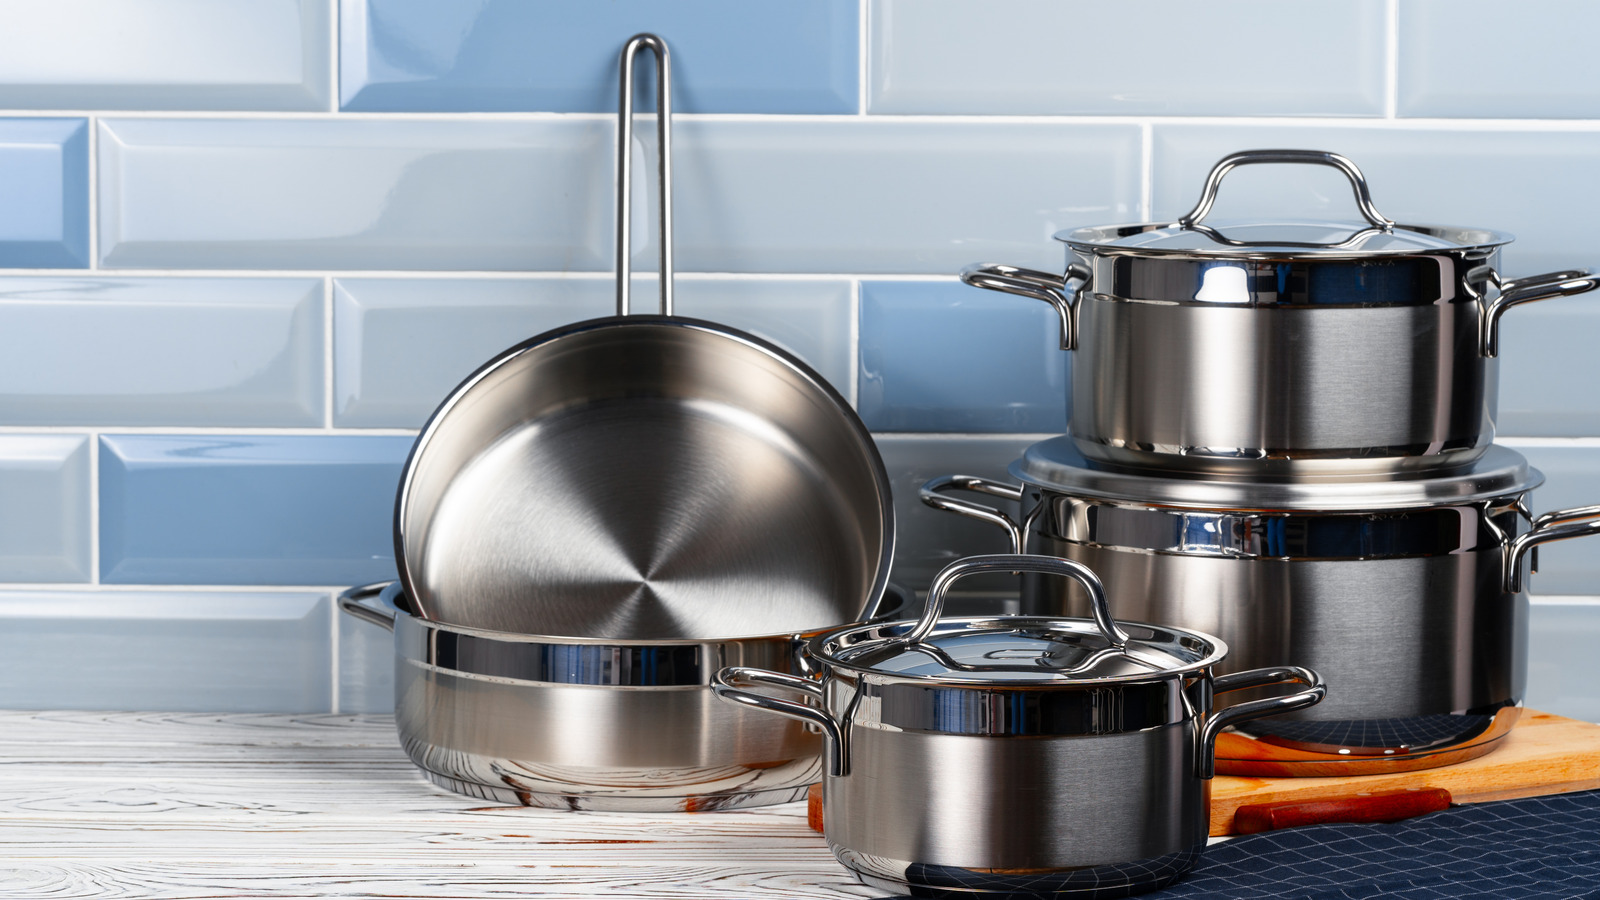 https://www.mashed.com/img/gallery/what-you-need-to-know-about-aluminum-cookware/l-intro-1632839003.jpg